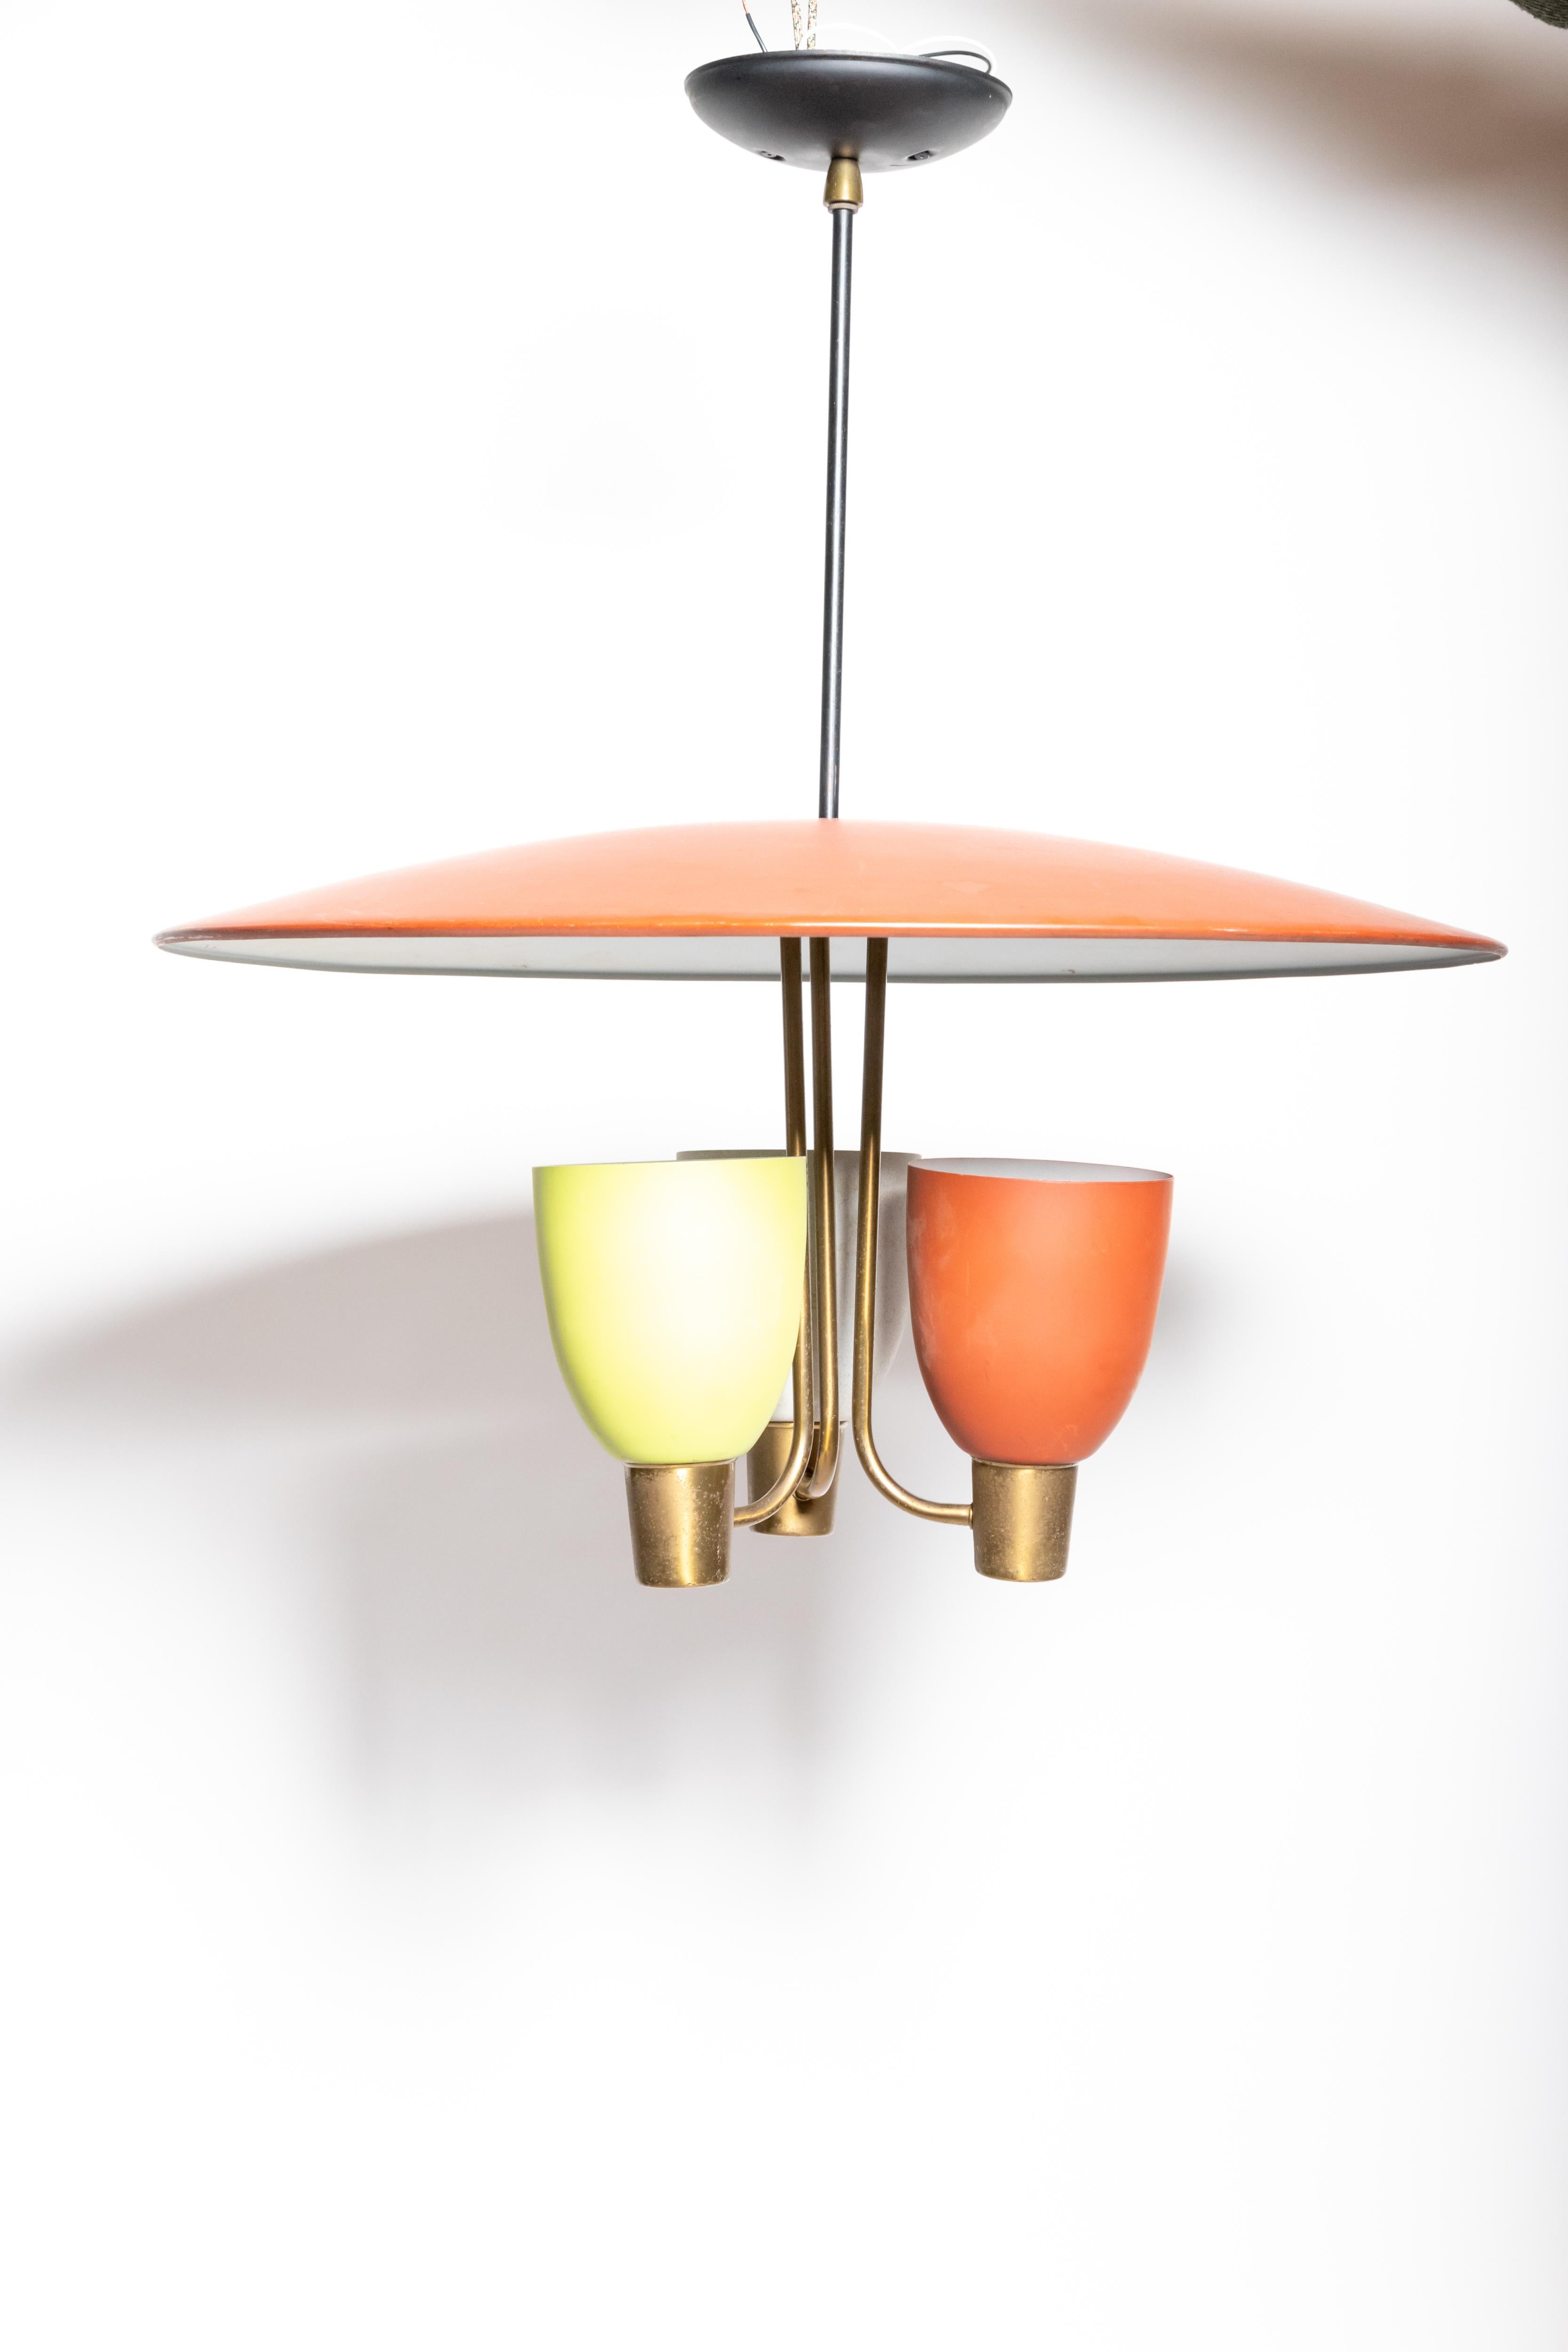 Tricolor Ceiling Fixture with Three Lights, c. 1950s 1